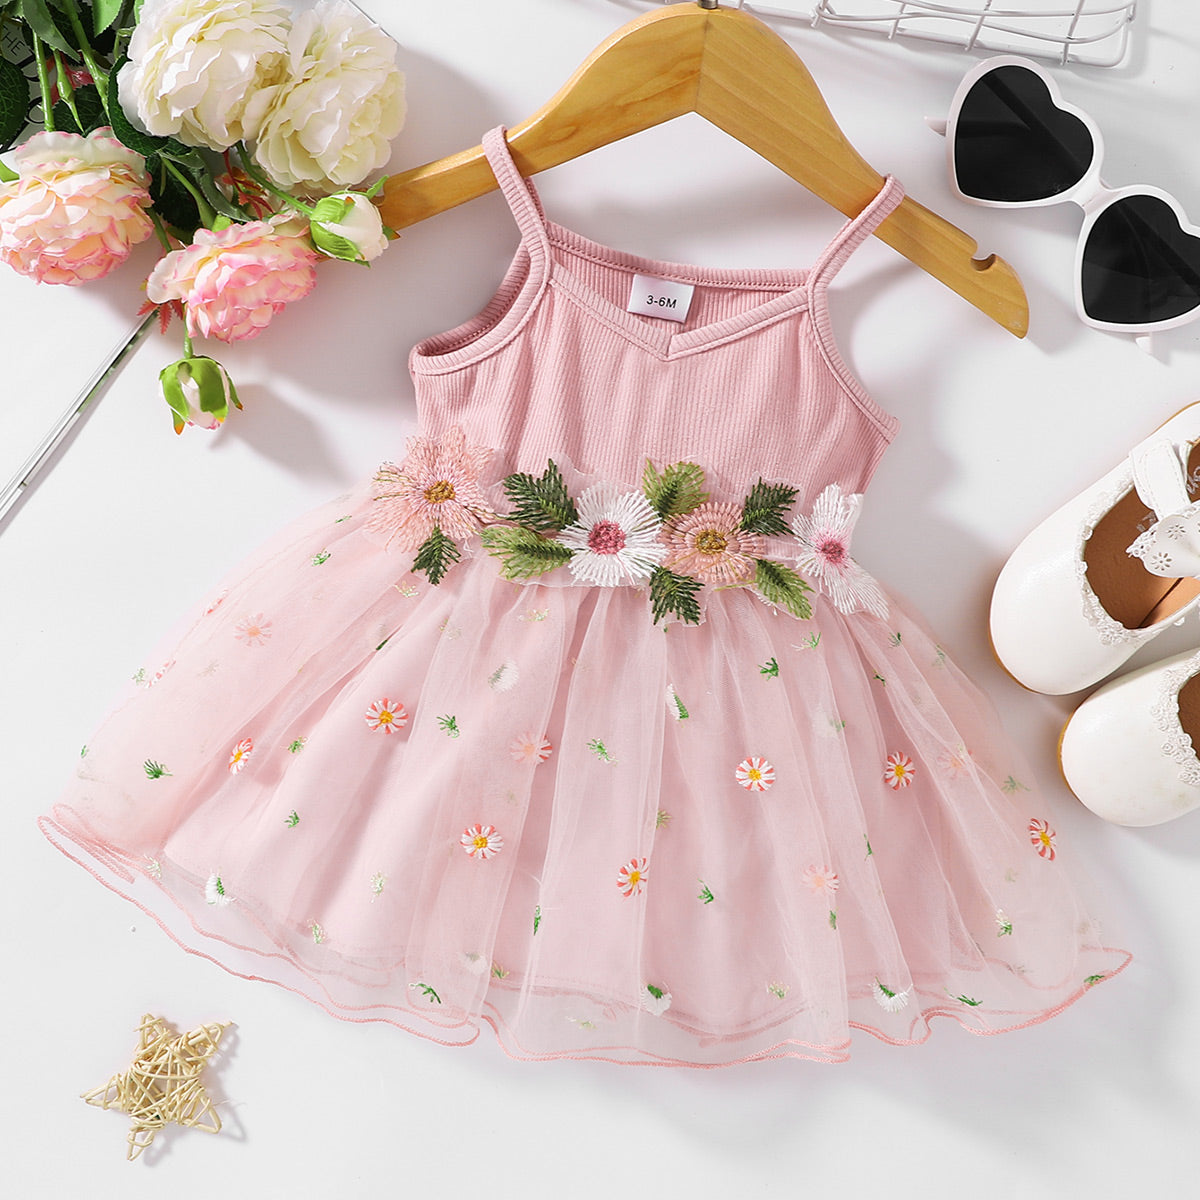 Cute Baby Girl Preemie V-Neck Dress with Embroidered Spaghetti Straps